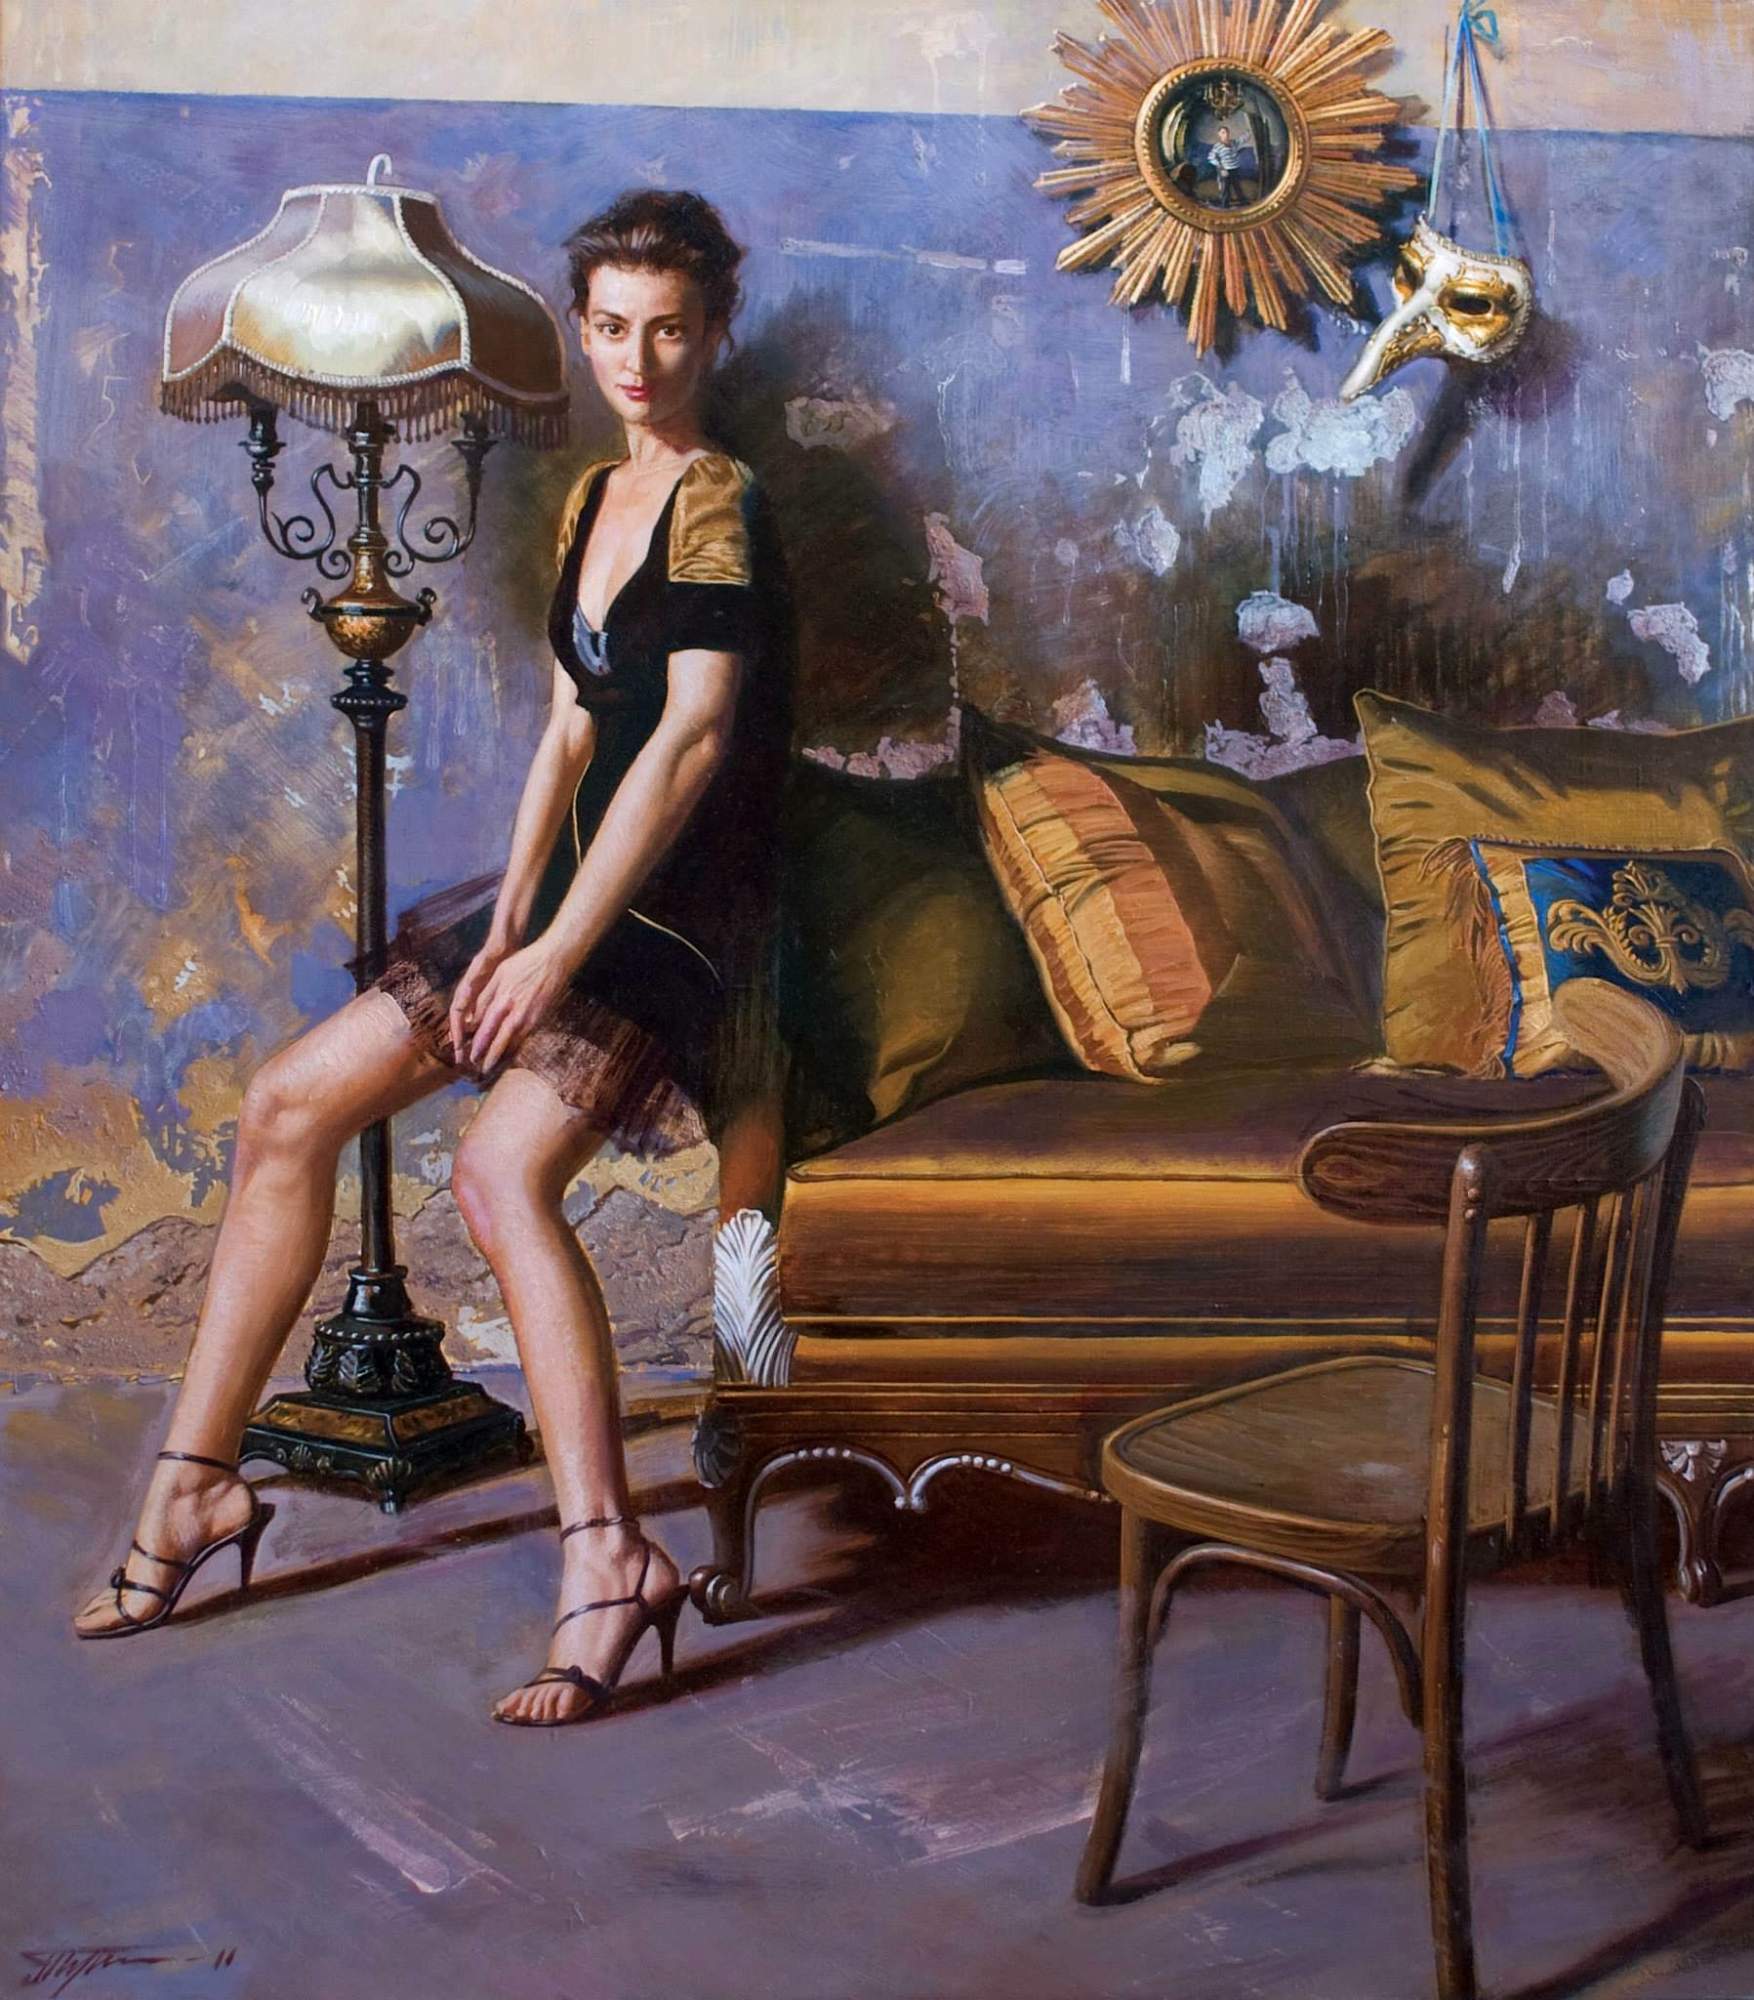 Model and artist, oil on canvas, 40.16"h x35.43"w (102x90cm), 2011